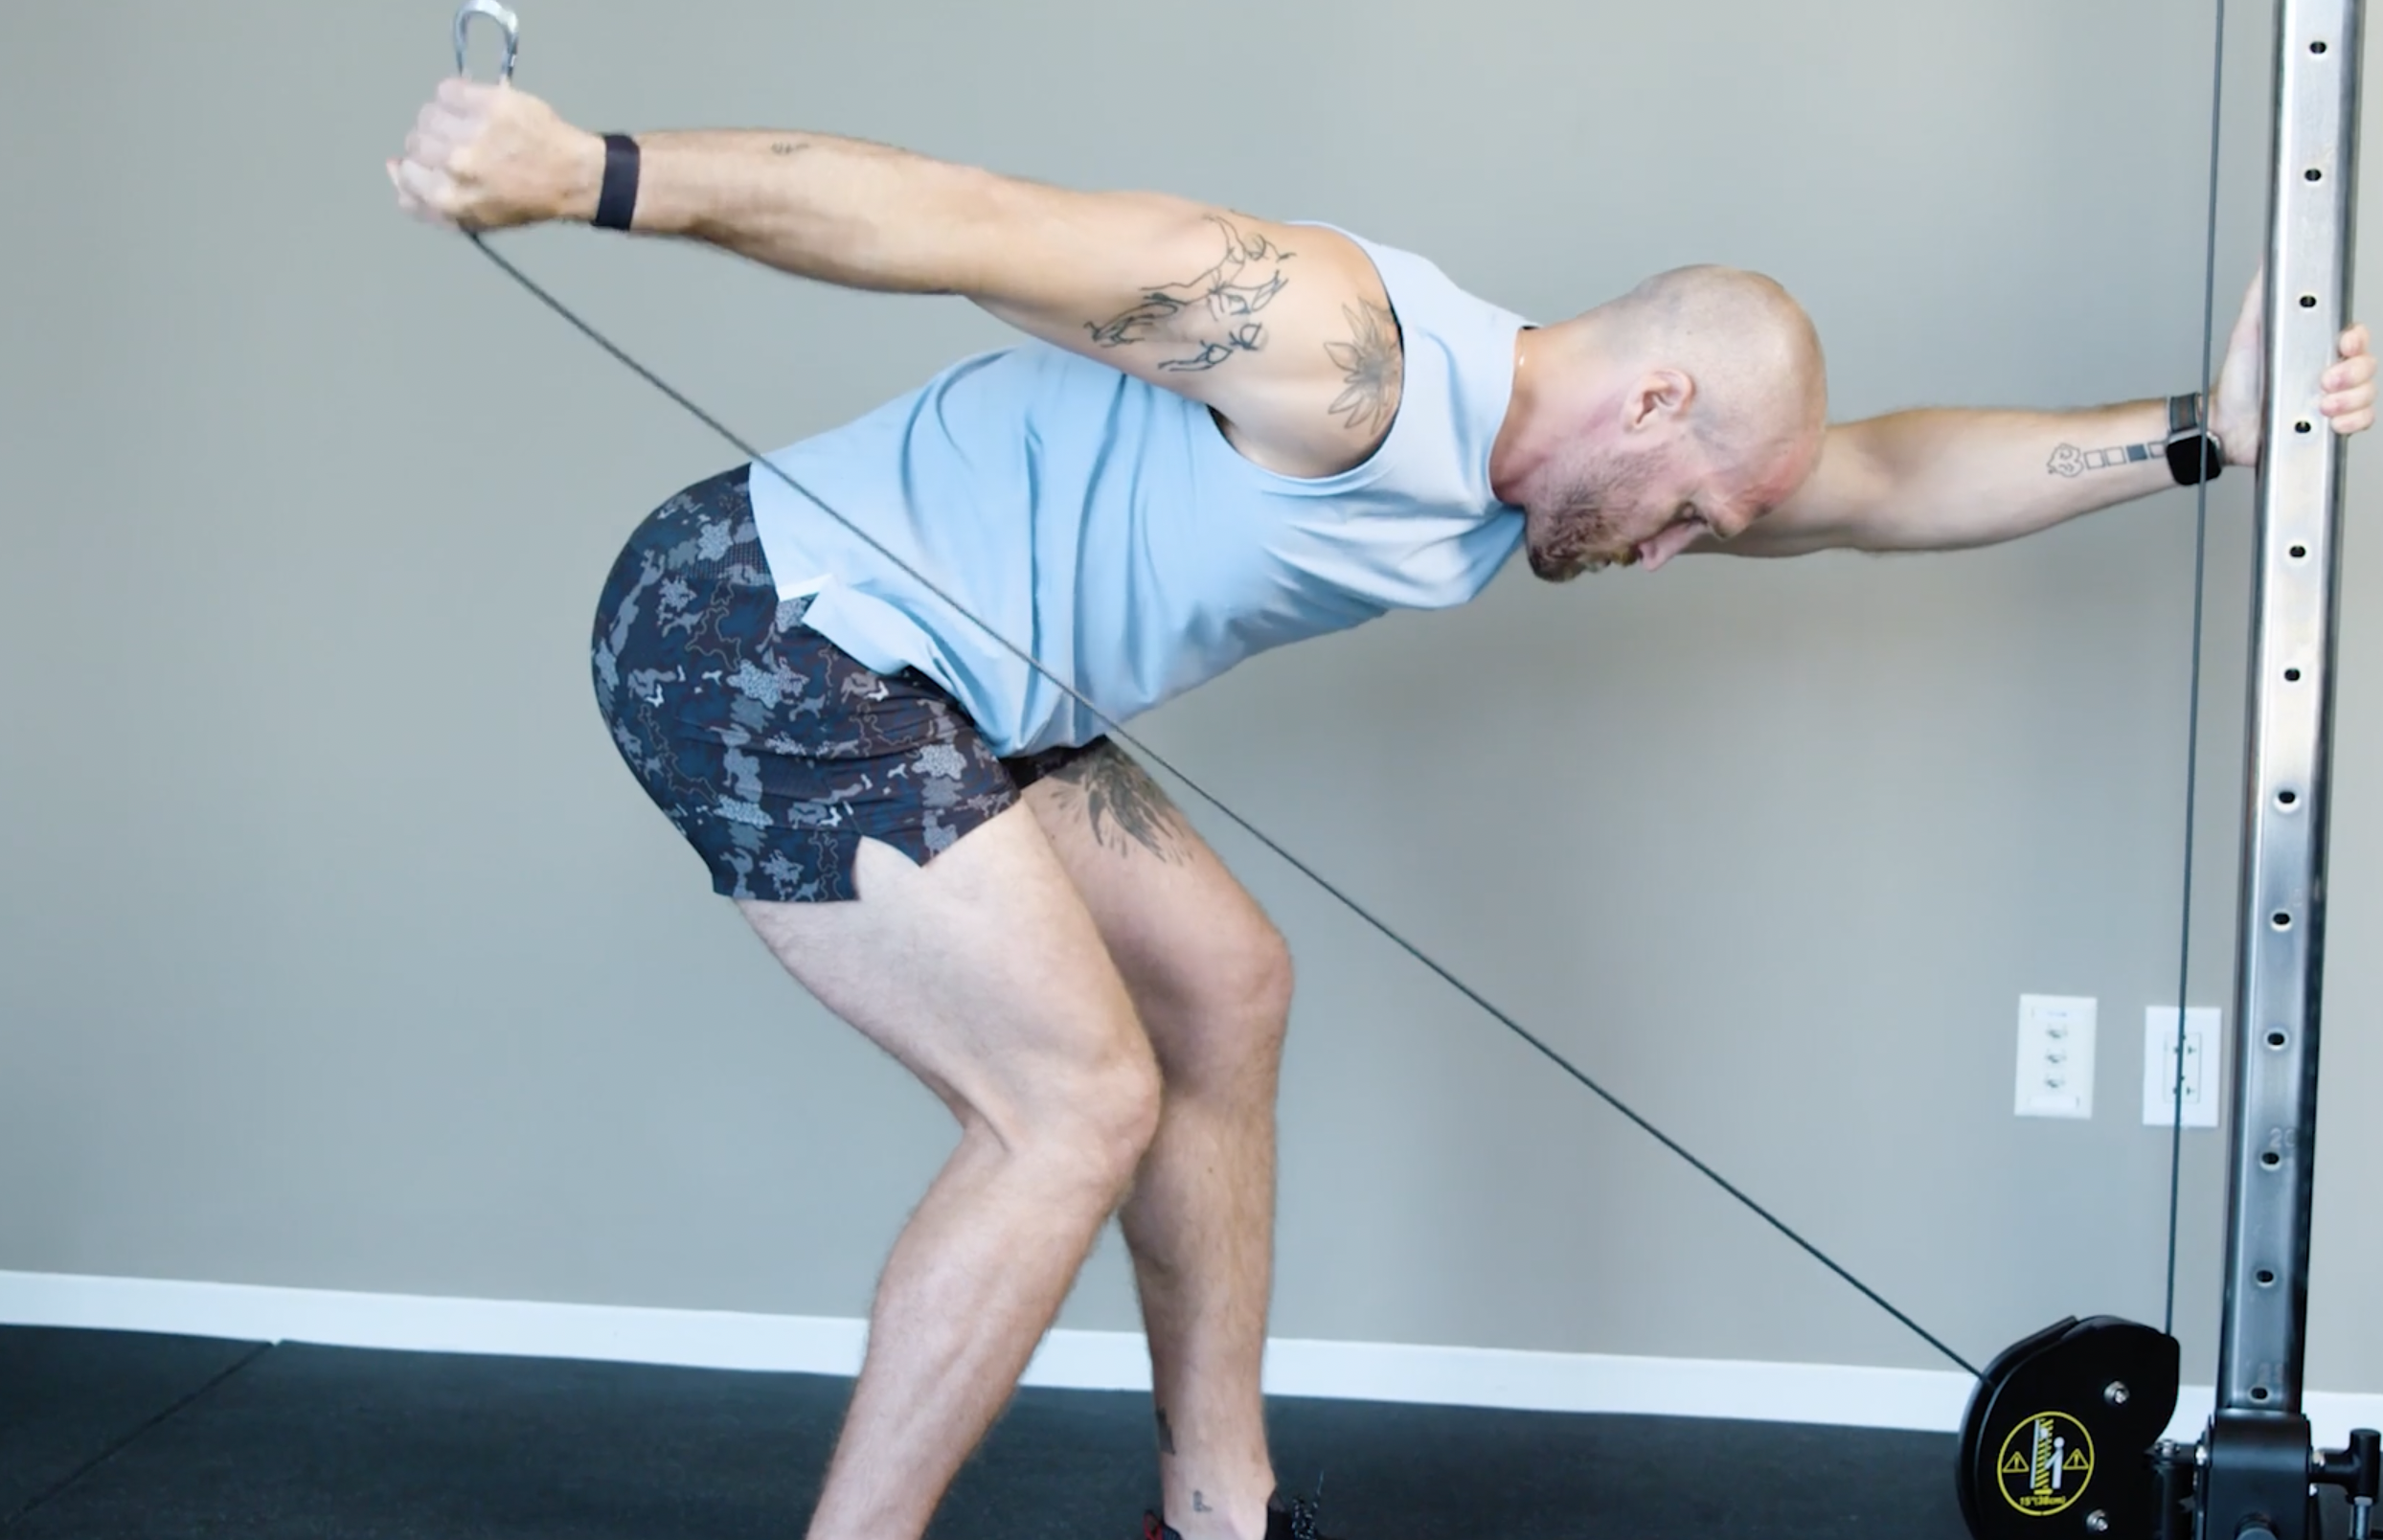 How to Fix Your Close-Grip Pushup Form to Target Your Triceps